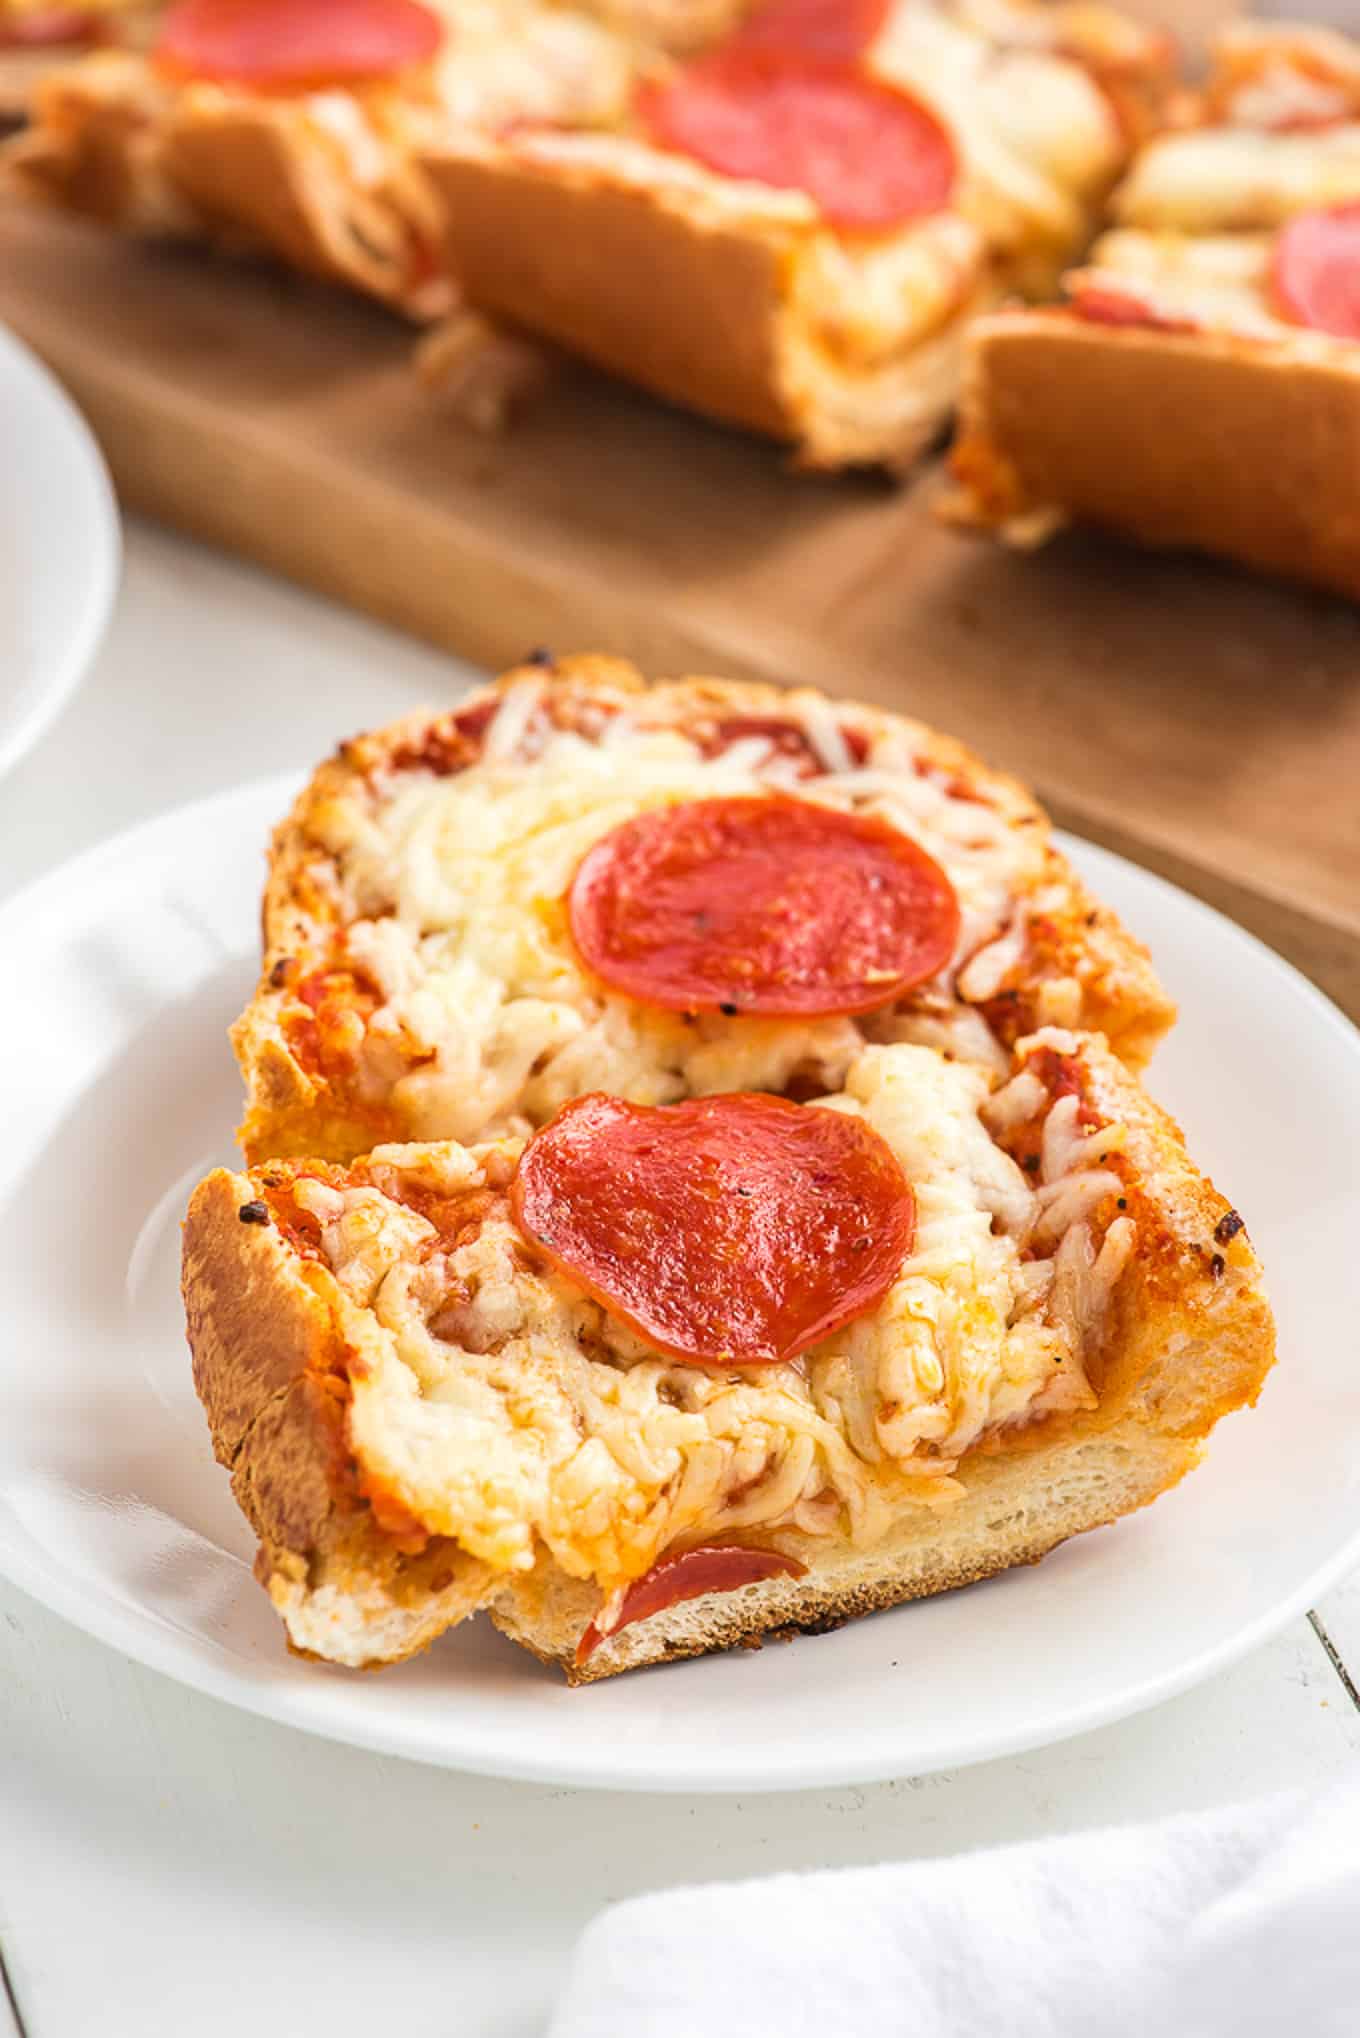 Slices of pizza on a plate made from french bread.